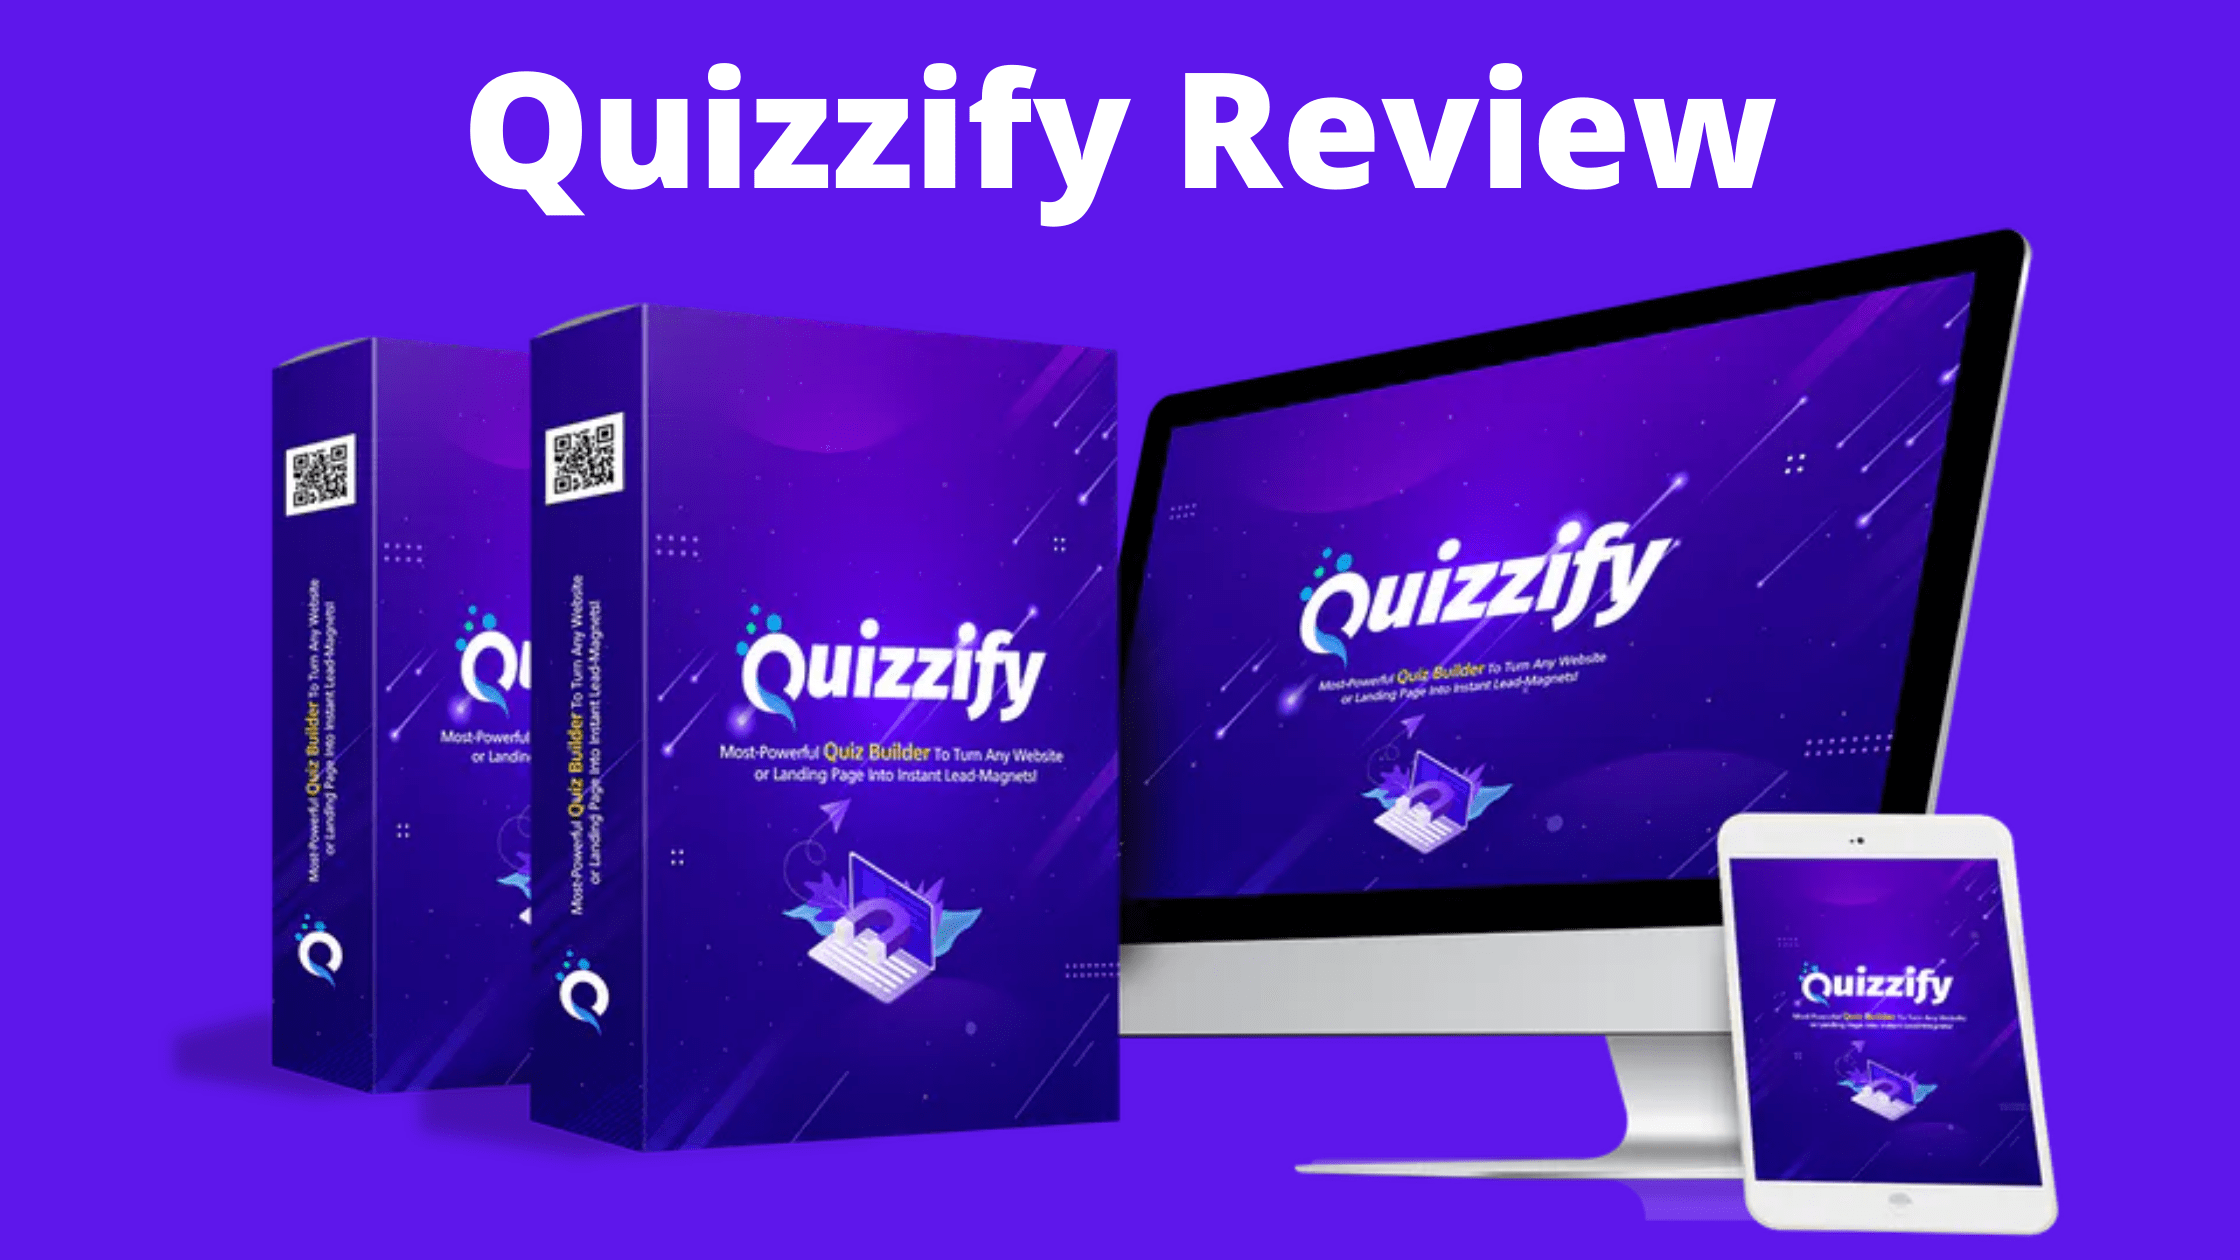 Quizzify Review